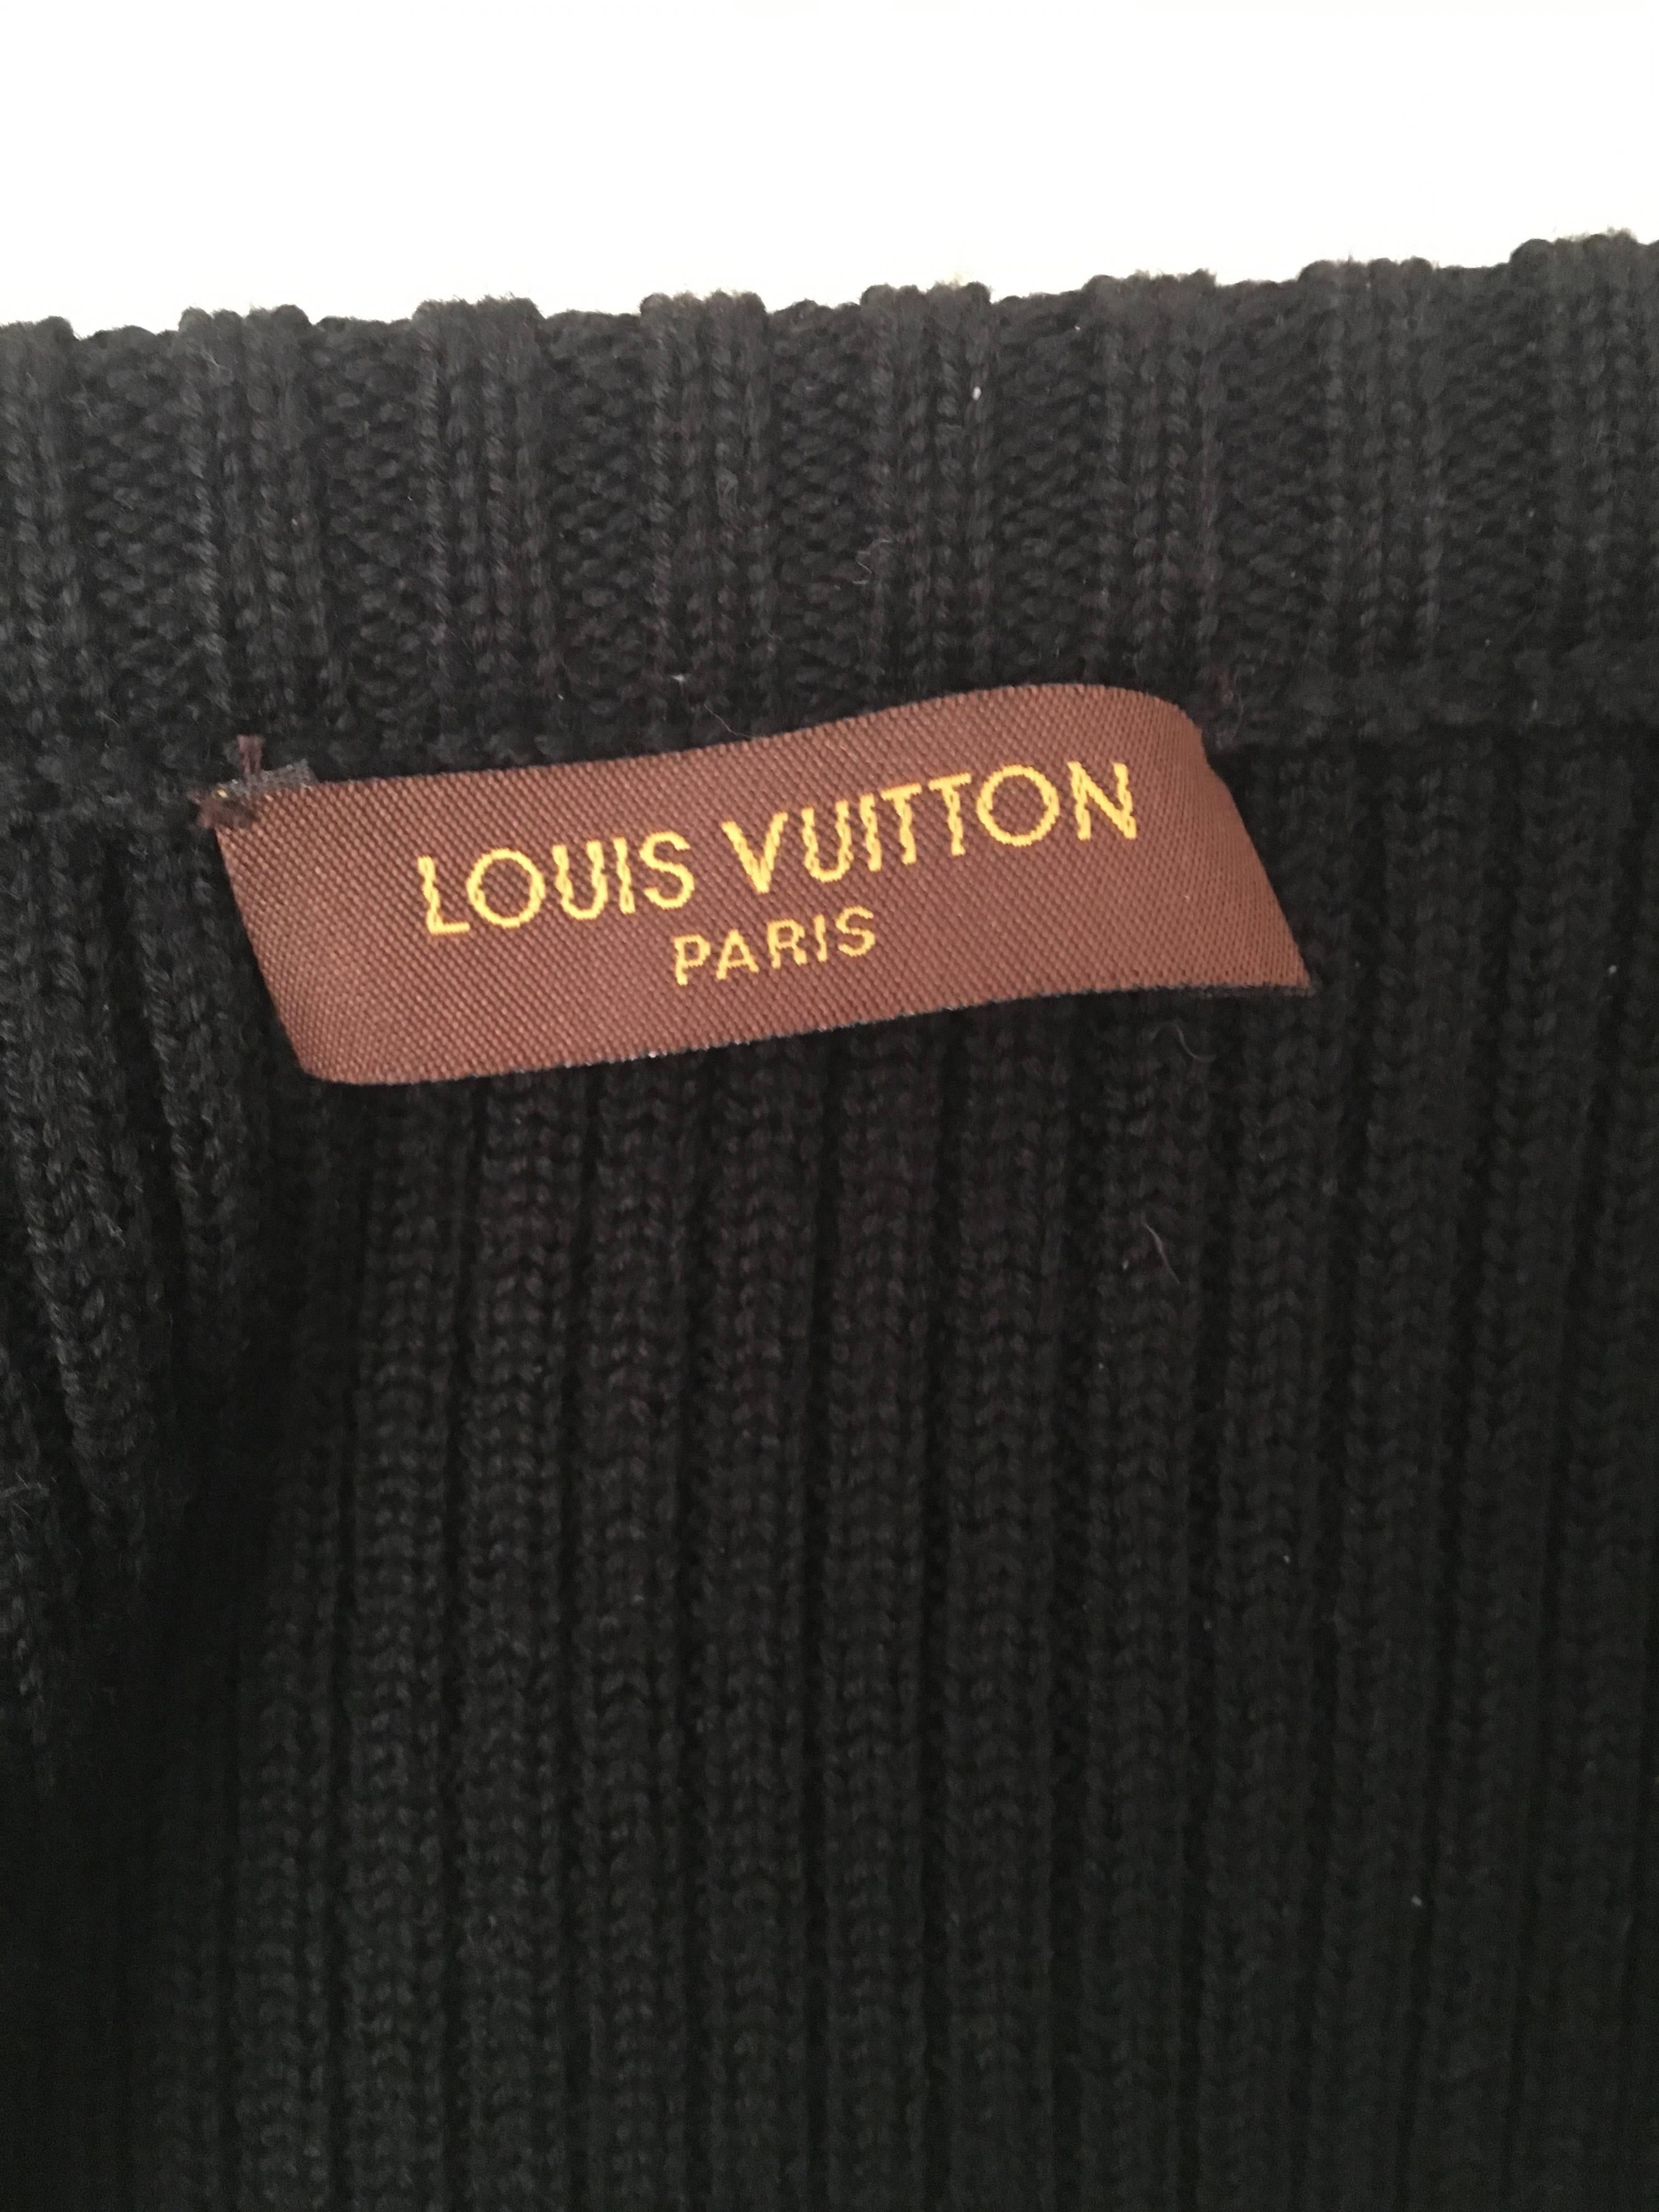 Louis Vuitton Dress Black and White Runway In Excellent Condition For Sale In Boca Raton, FL